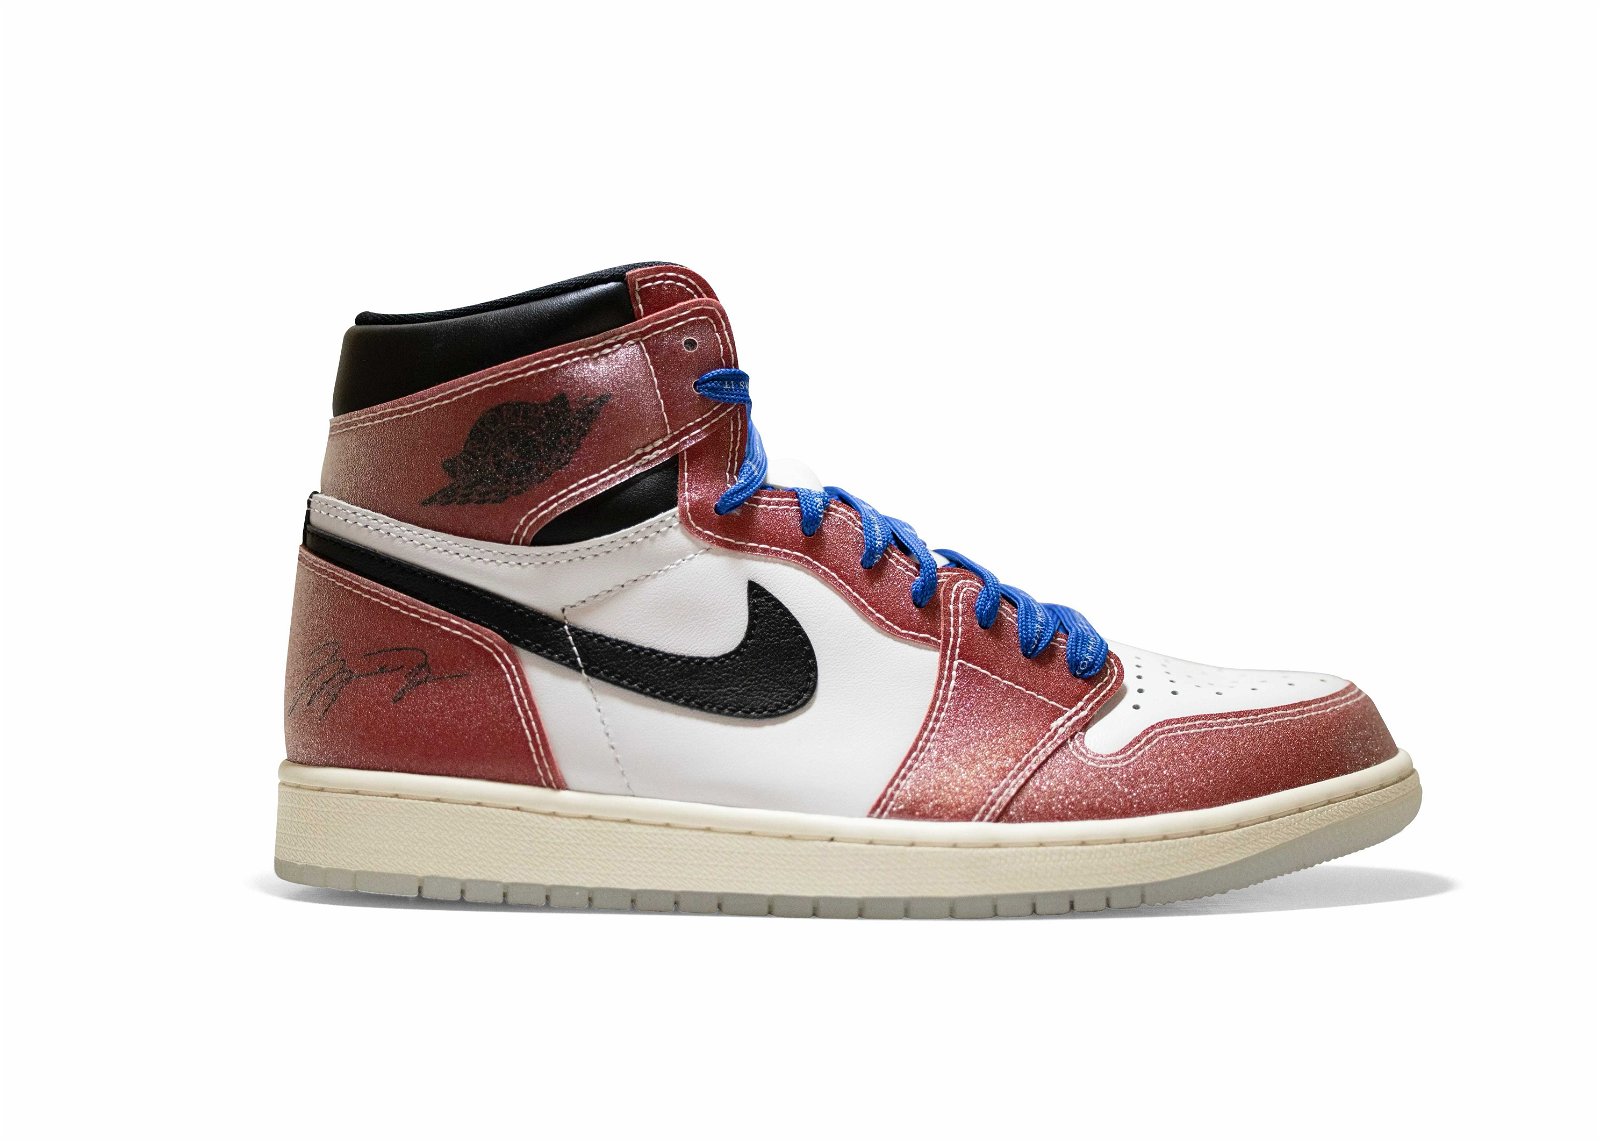 Jordan 1 Retro High Trophy Room Chicago (Friends and Family) (W/ Blue Laces) sneaker informations